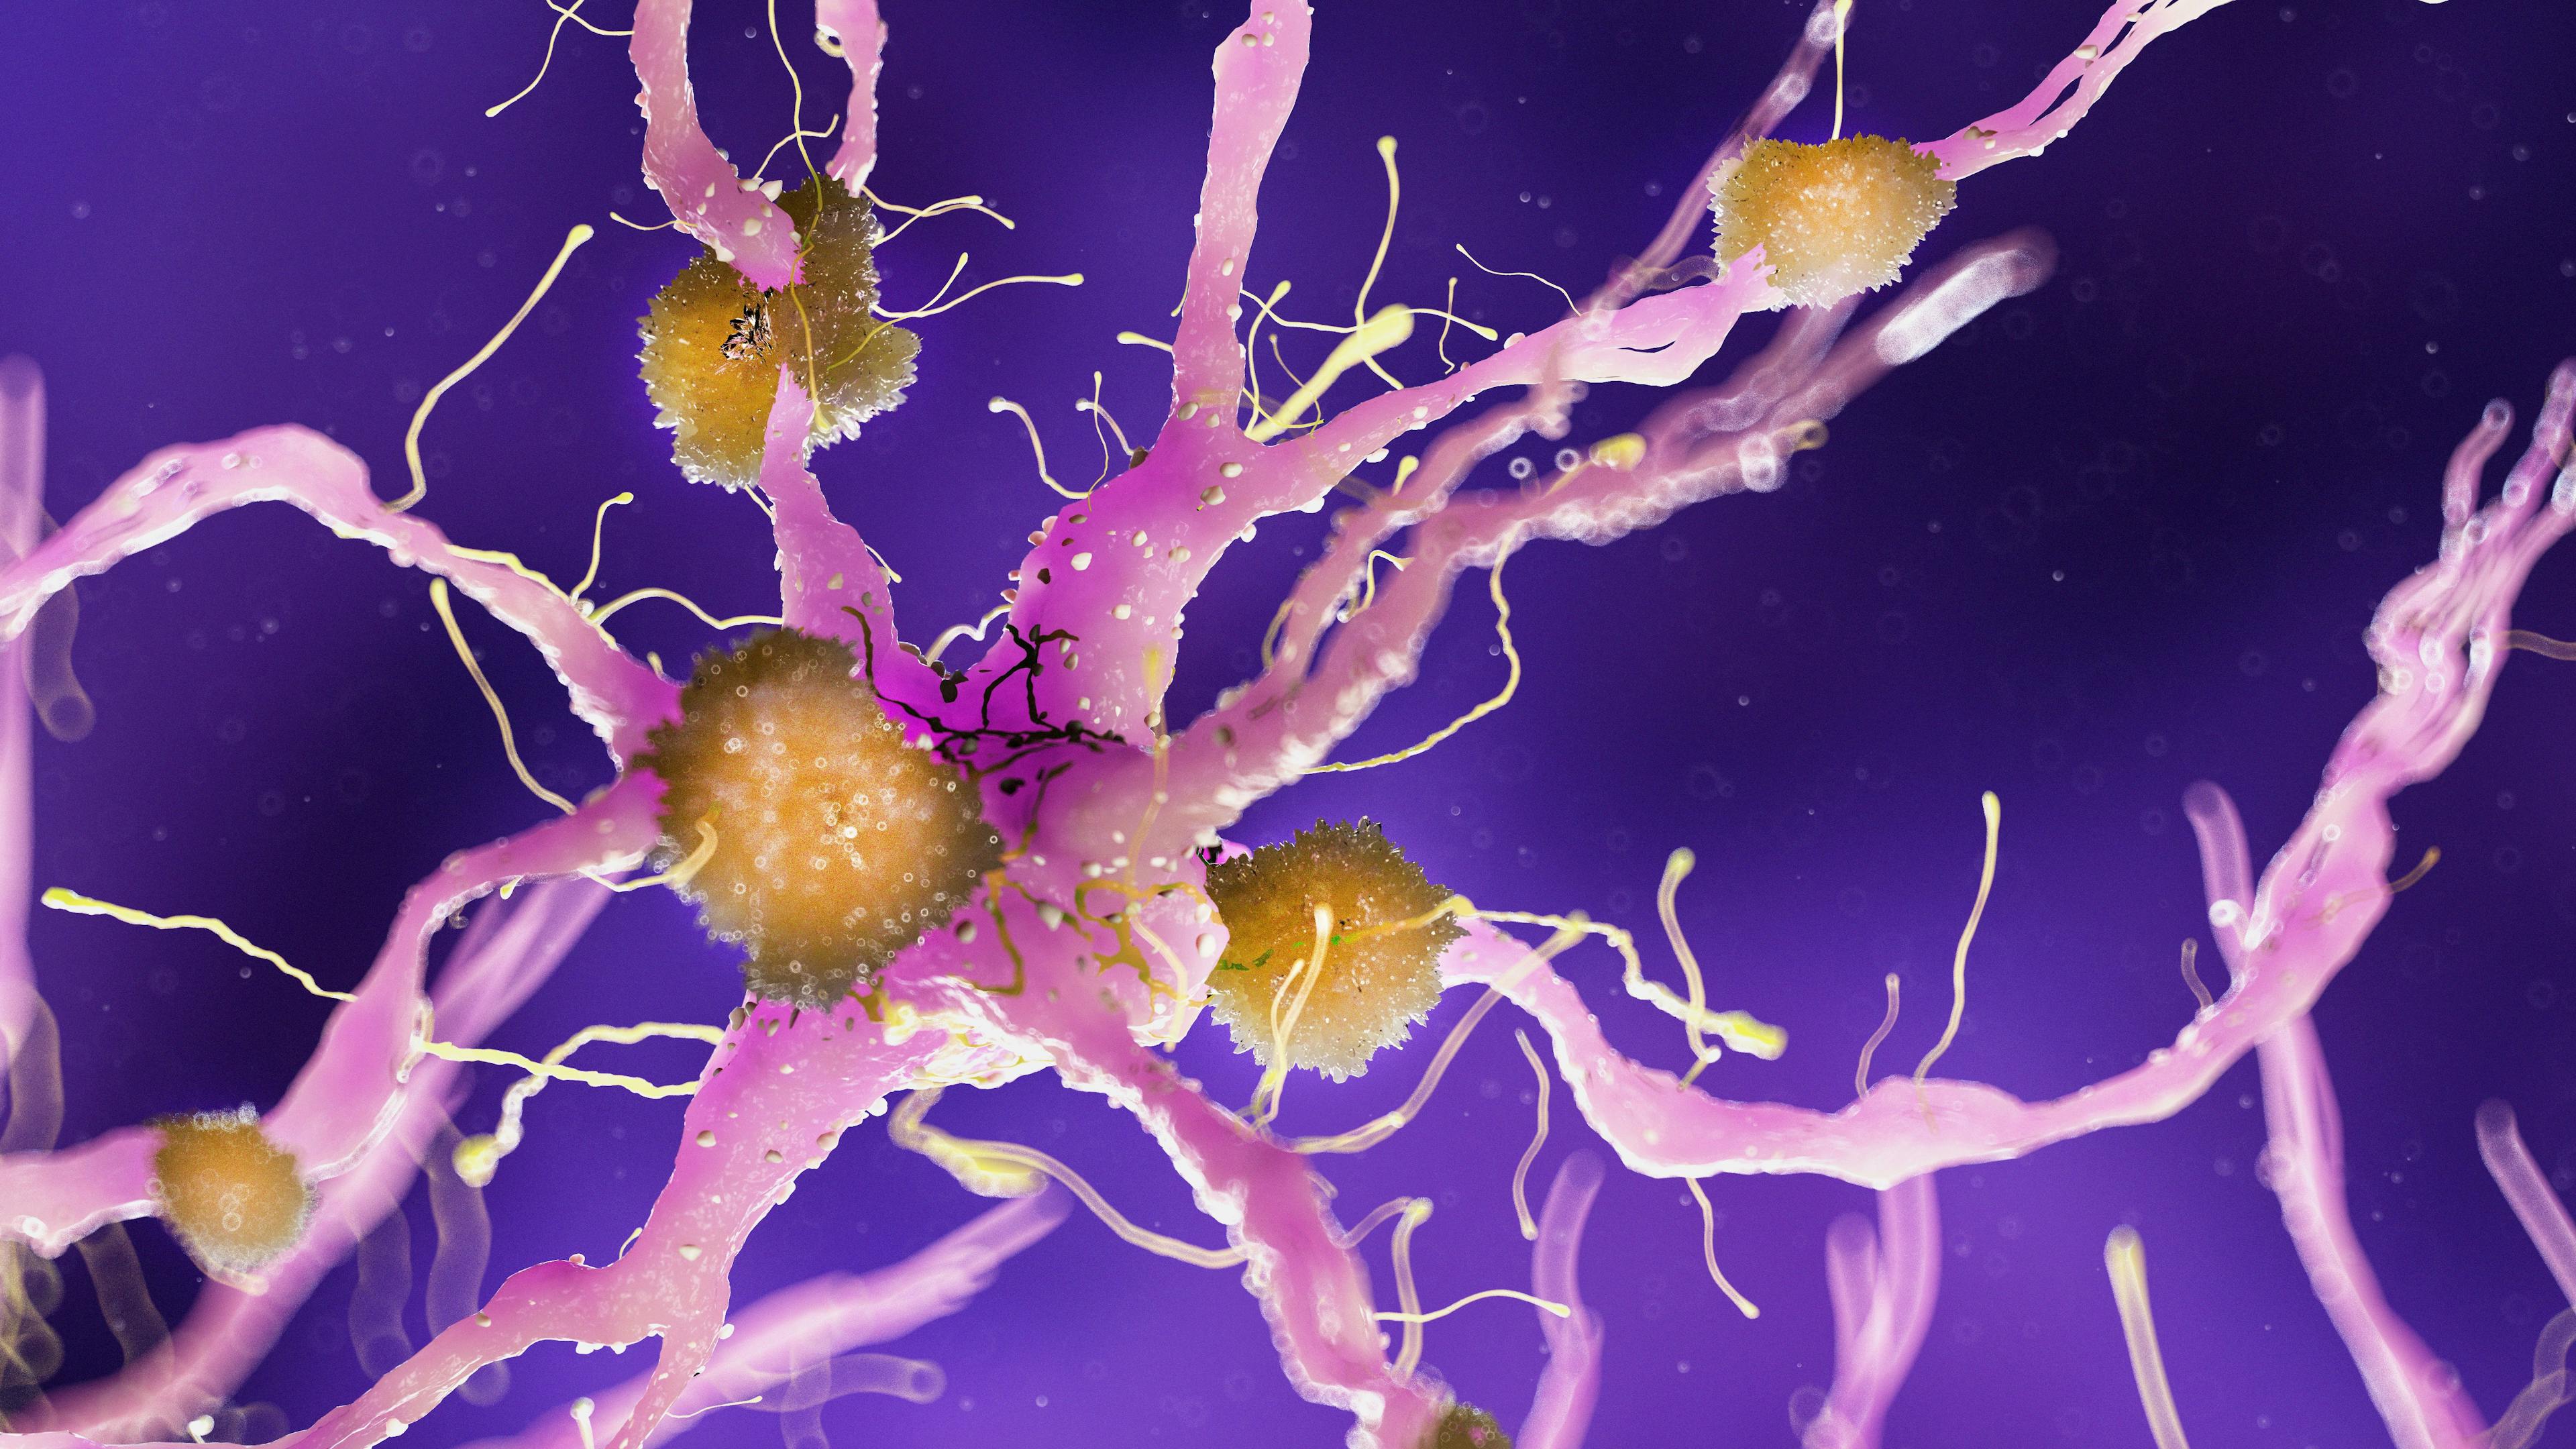 3d rendered medically accurate illustration of amyloid plaques on a alzheimer nerve cell | Image Credit: Sebastian Kaulitzki - stock.adobe.com